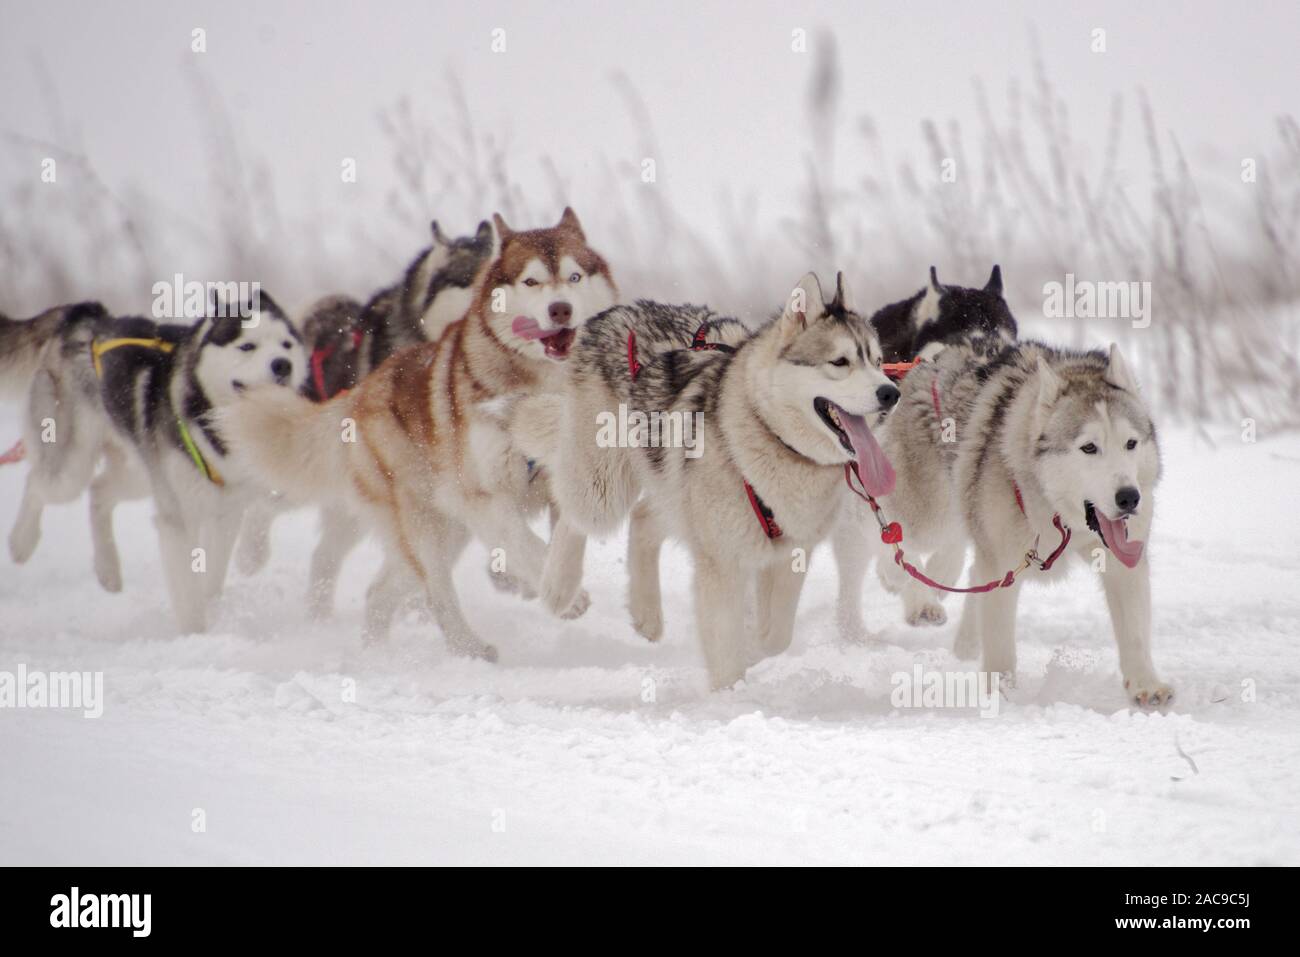 Sled dog team of 6 competes in a sled dog racing competitions Stock Photo